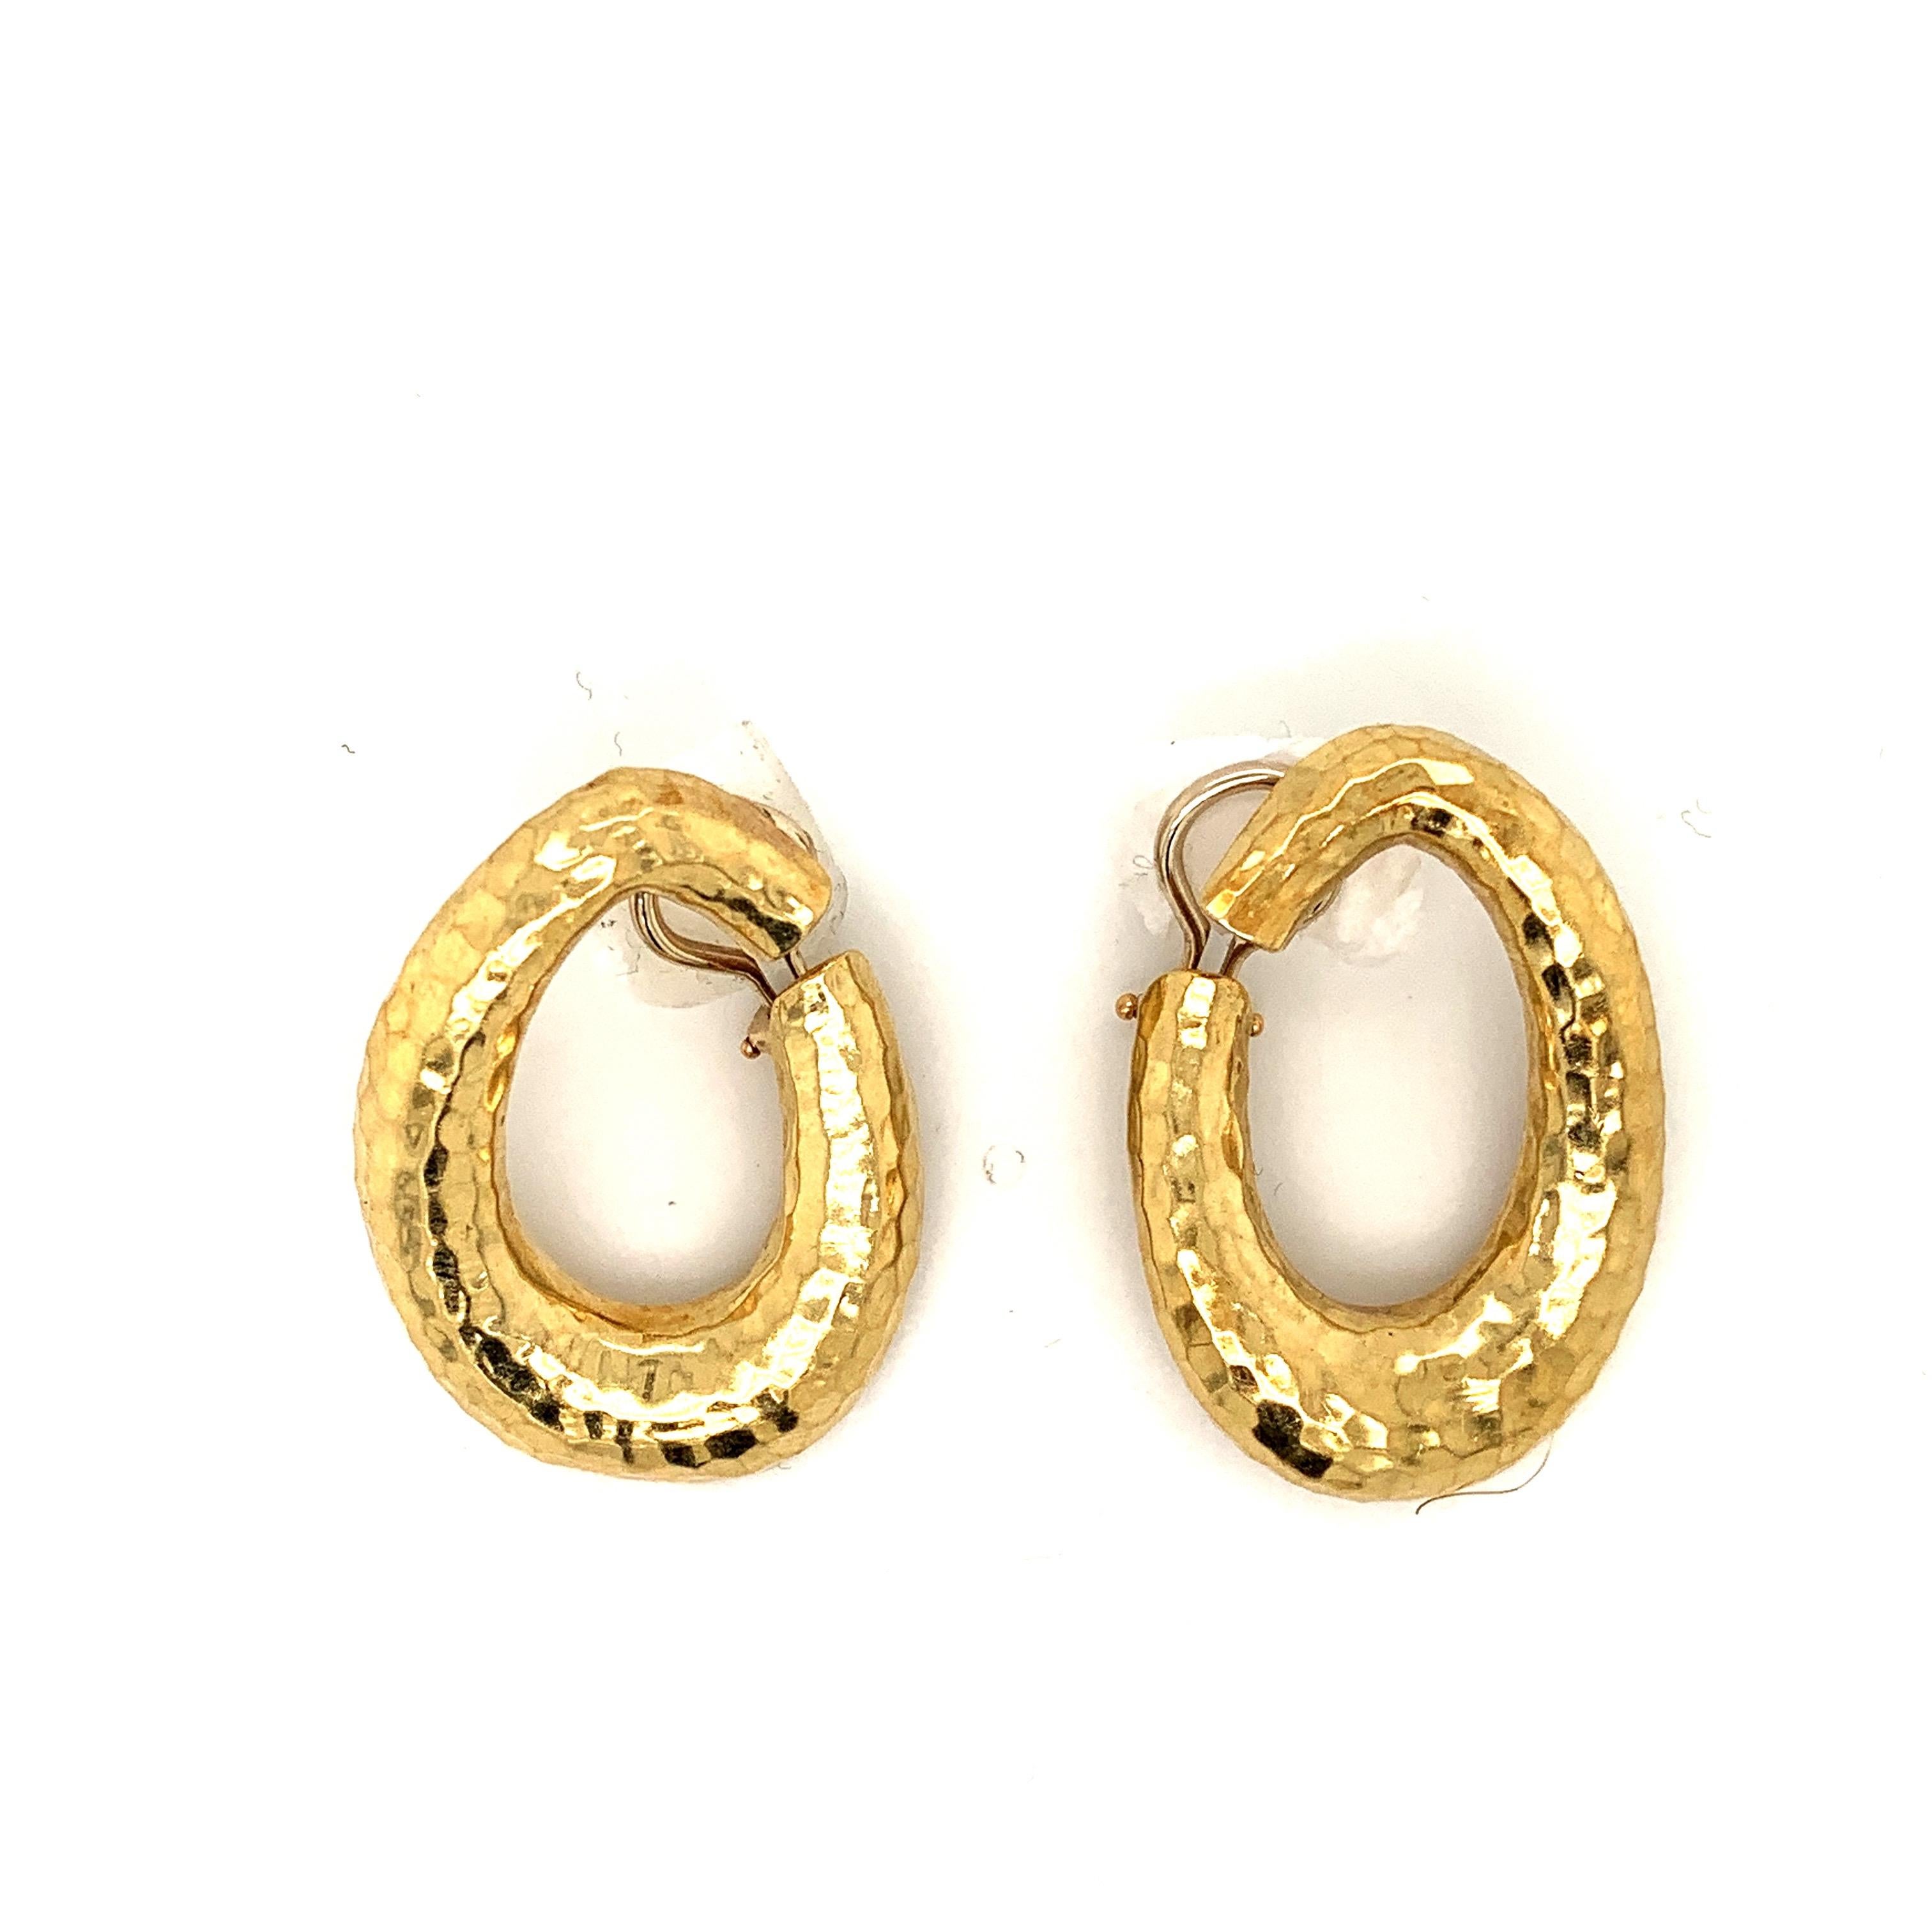 18k hammered yellow gold hoop earrings.
Handcrafted using an age old method of hand hammering. These lovely clip on earrings weighing over 17 grams of gold. Are understated yet elegant.